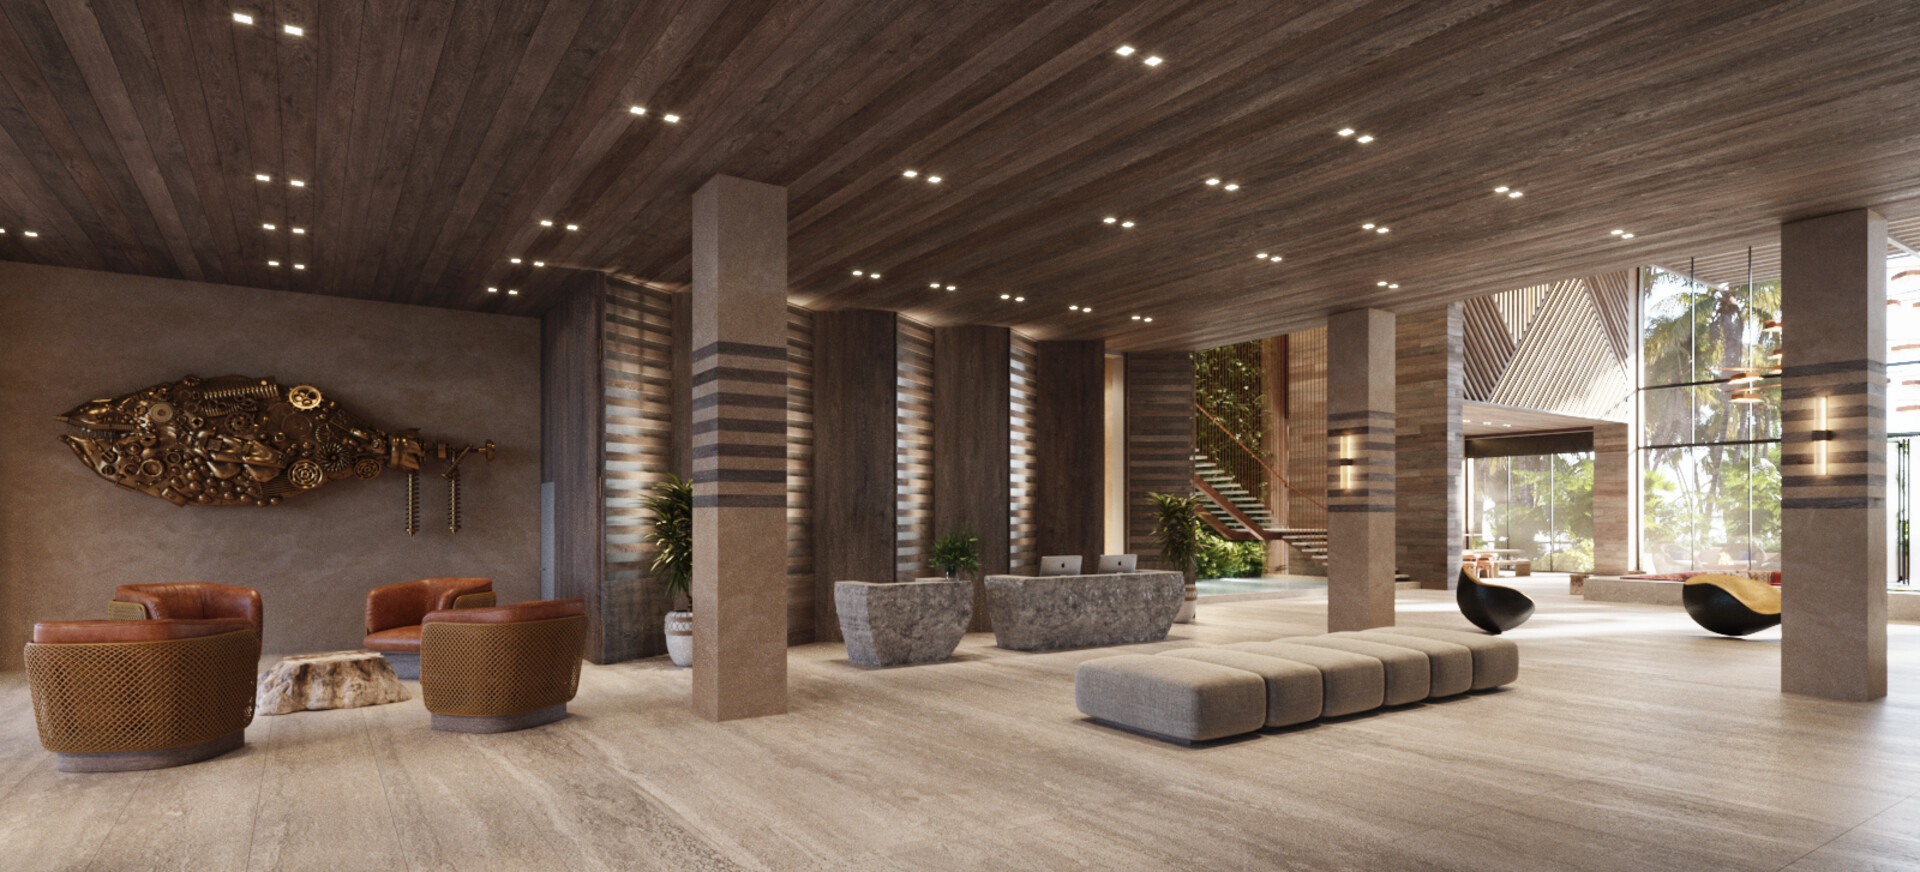 Another angle of seating, high ceilings, and natural materials around the hotel check-in area